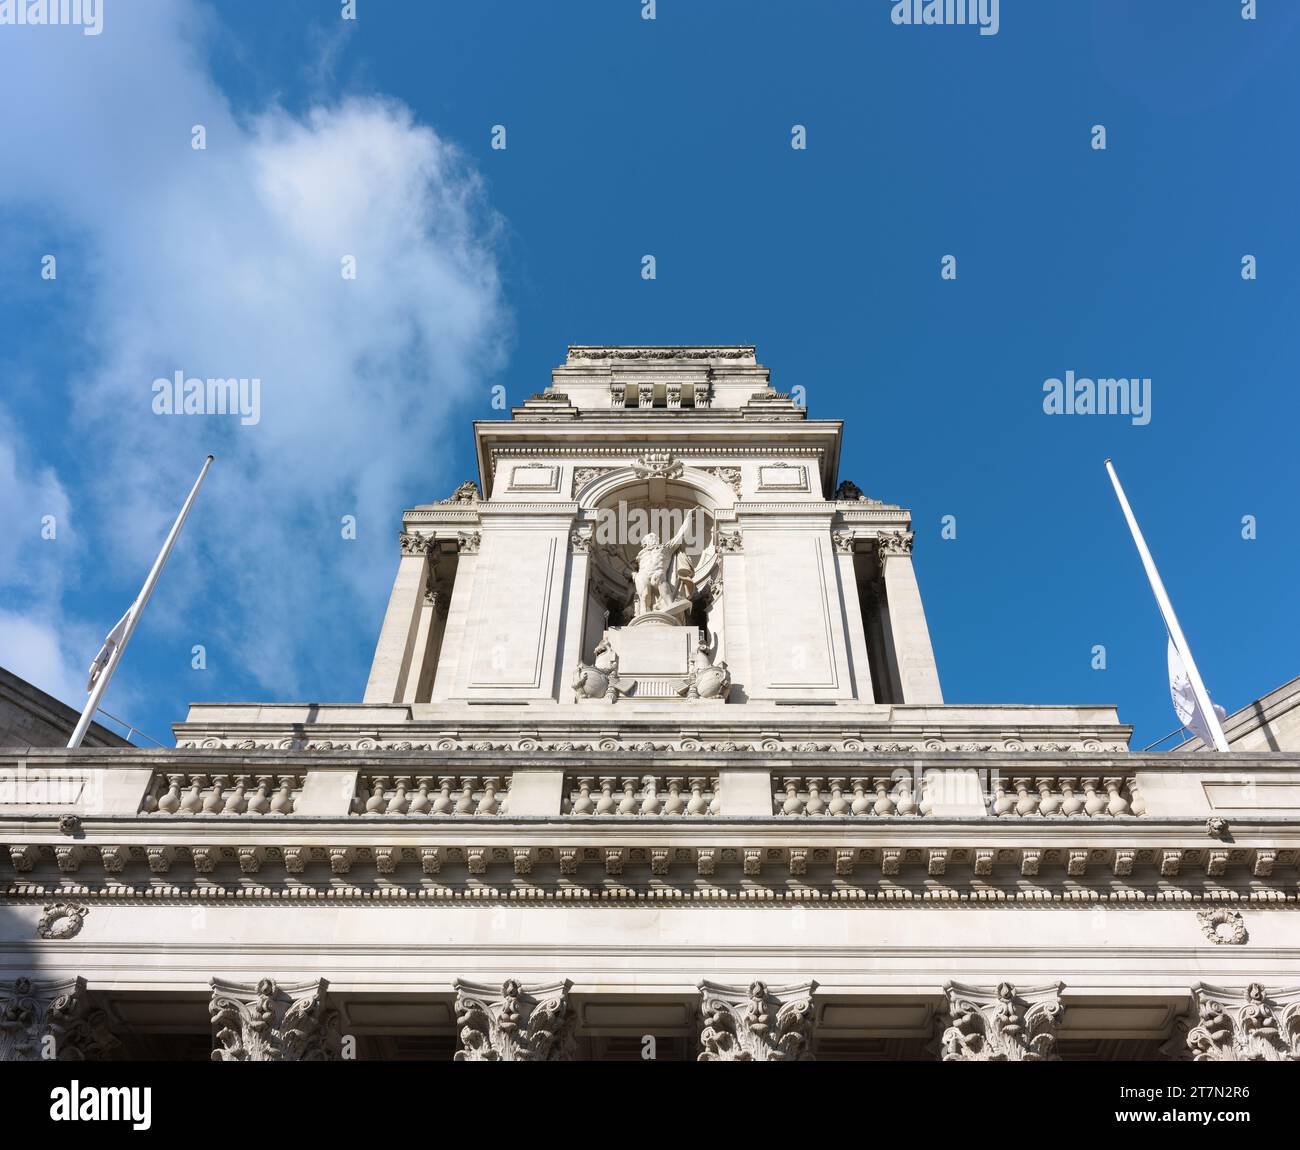 Four Seasons hotel (formerly Port of London Authority building) at 10 Trinity Square, London, England. Stock Photo